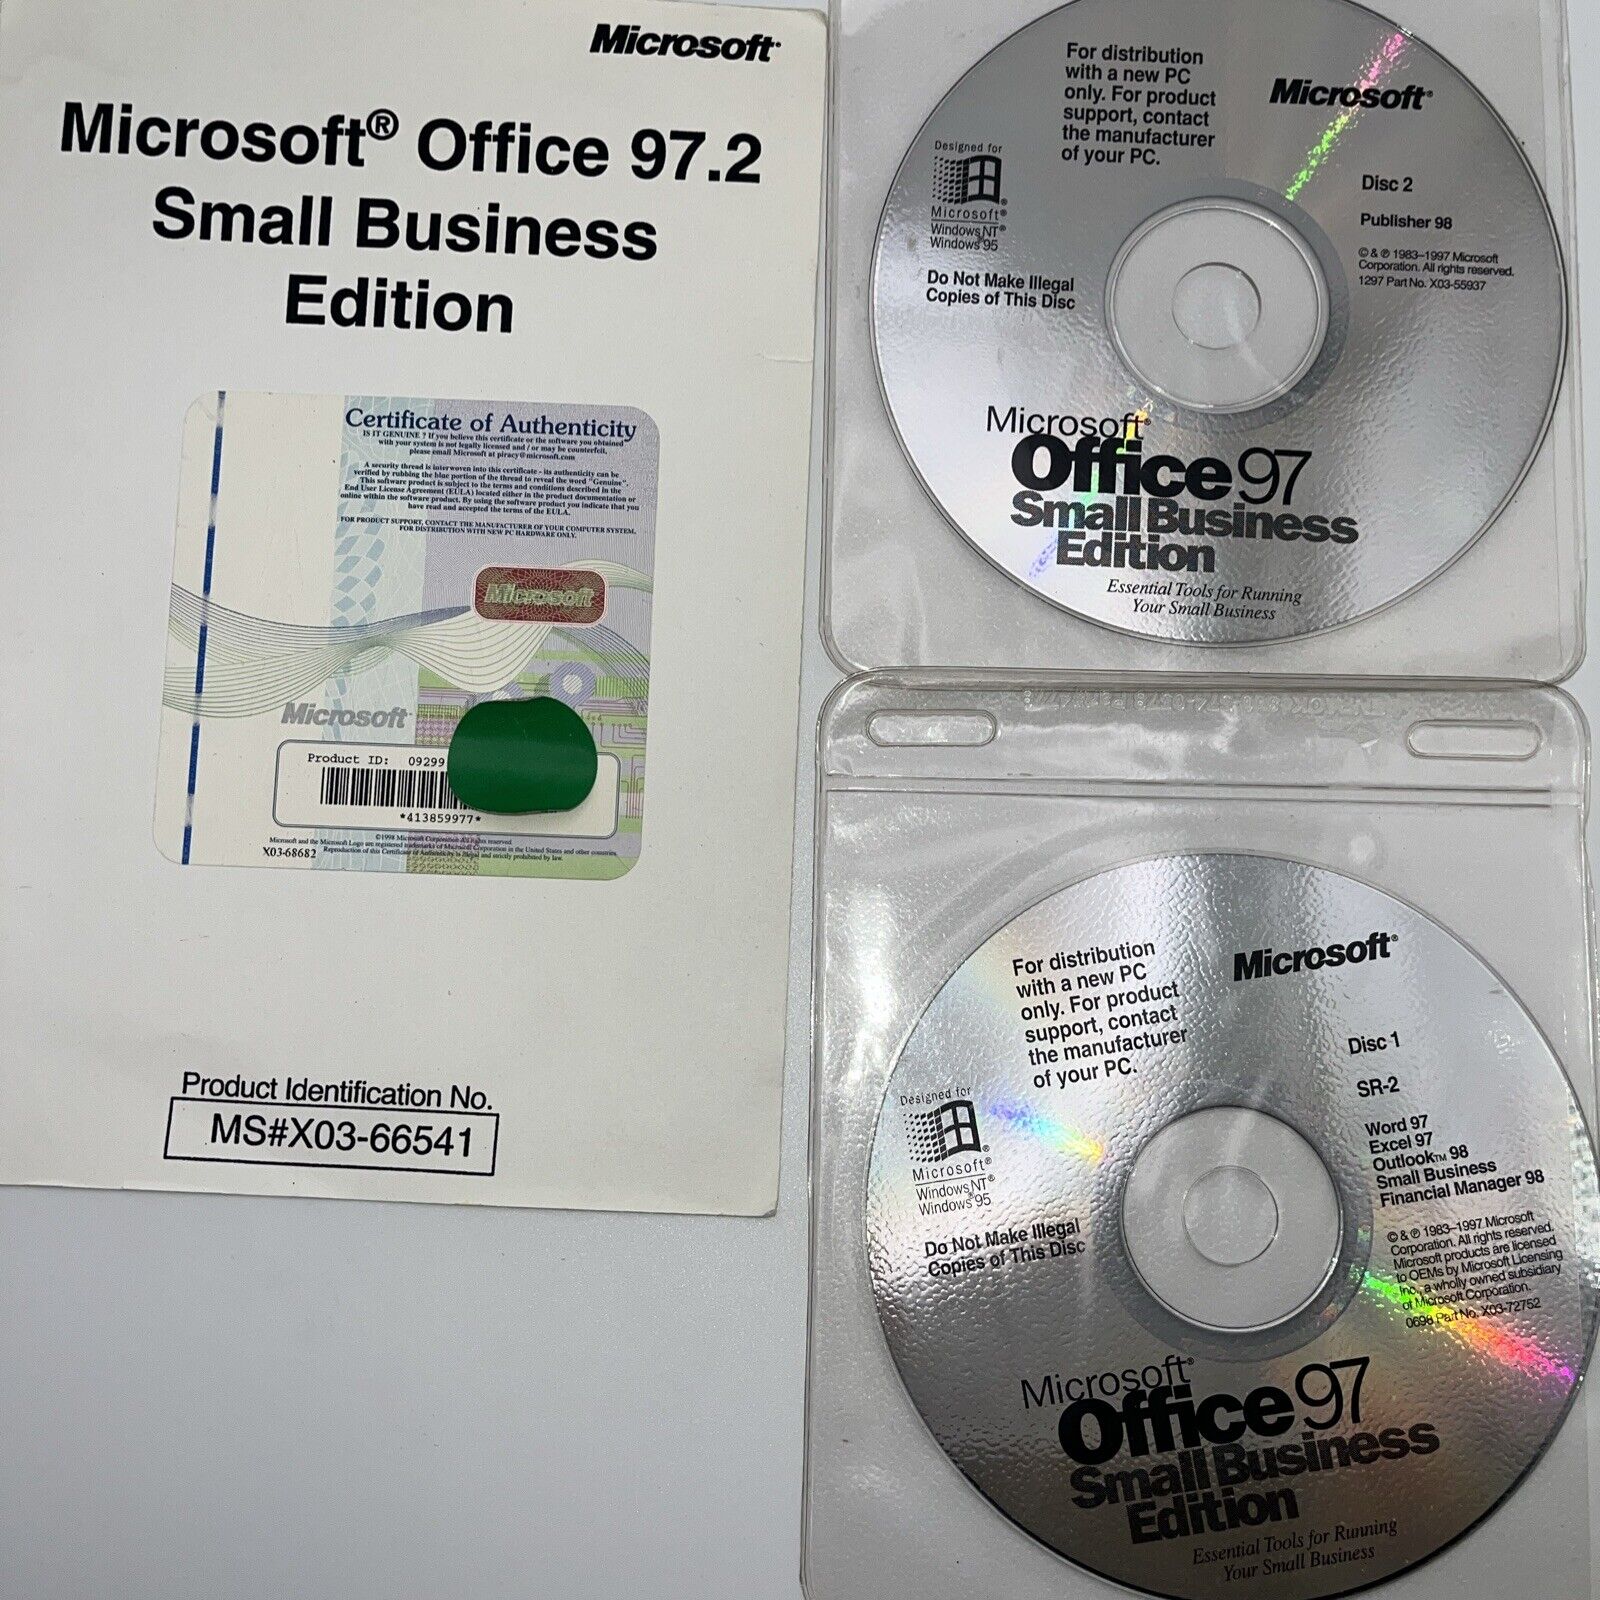 Microsoft Office 97.2 Small Business Edition Opened 2 Disks